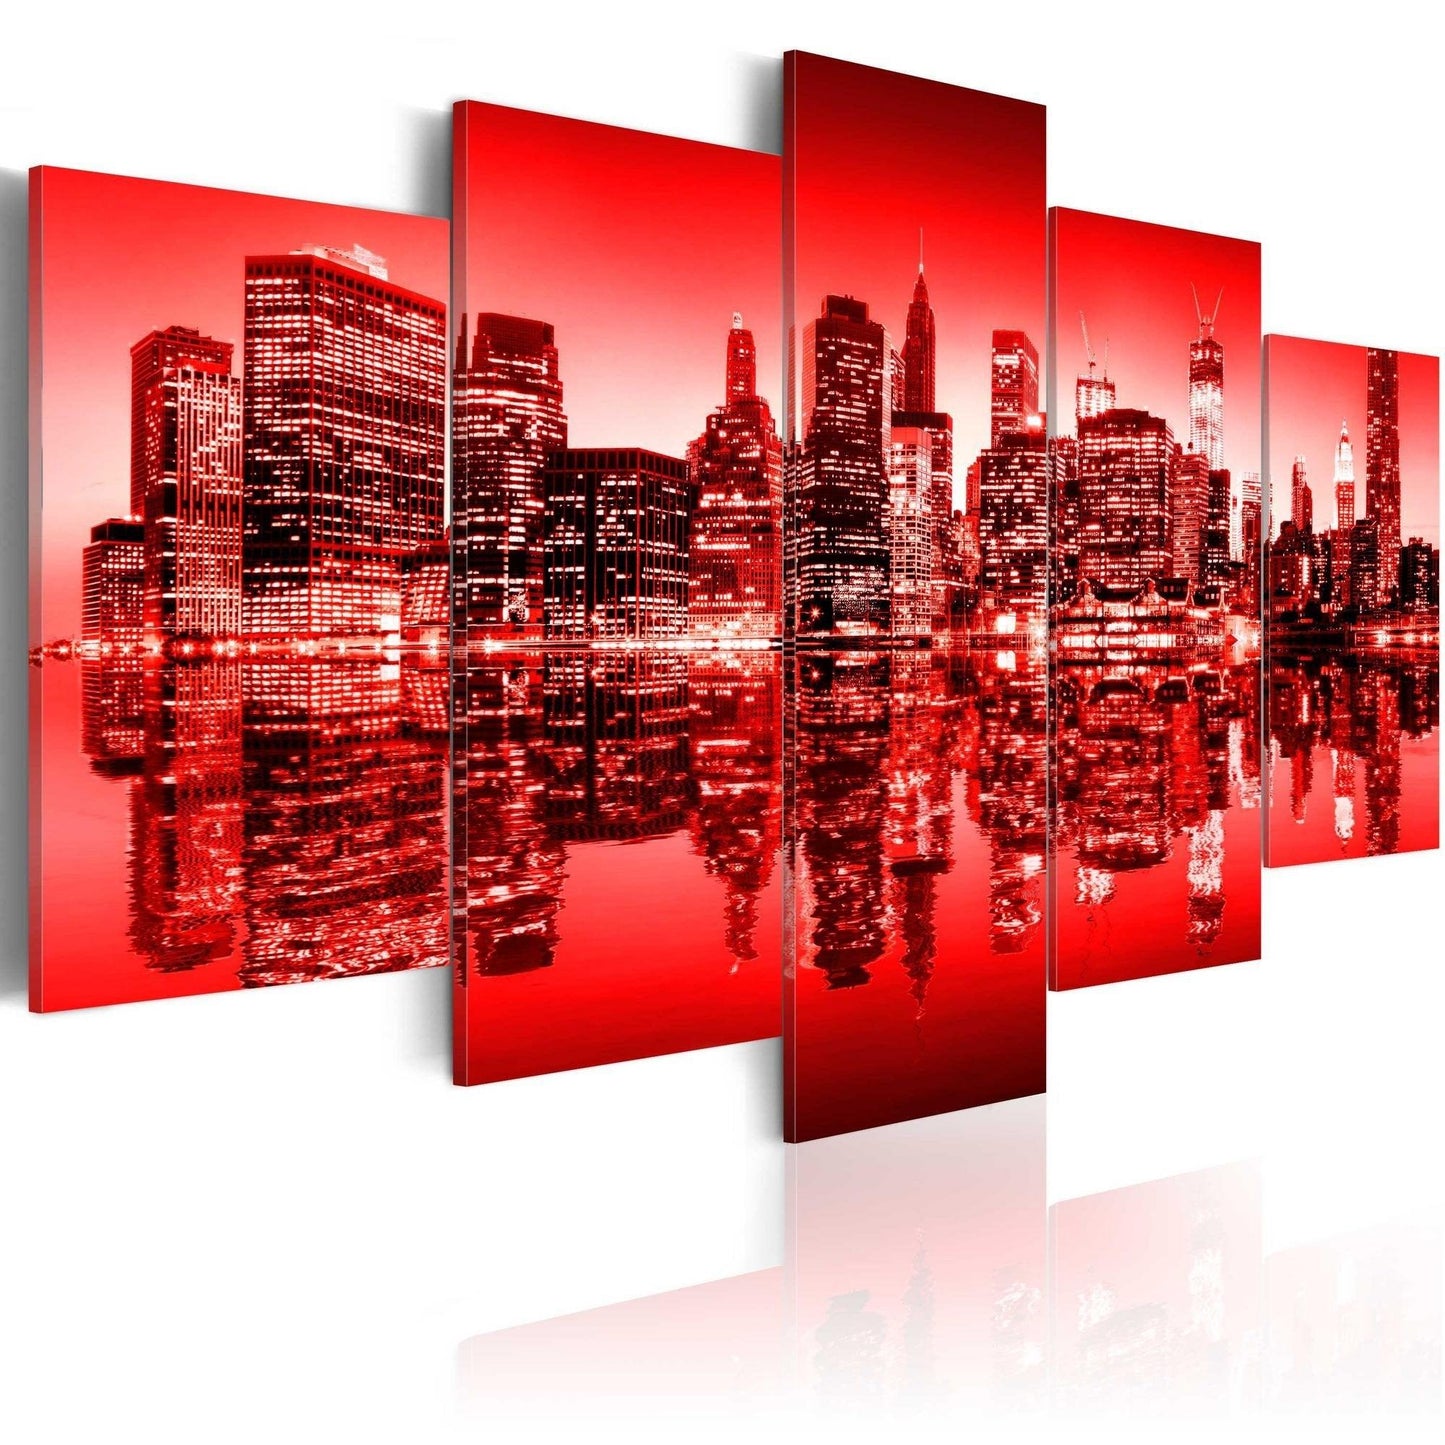 Canvas Print - Red glow over New York - 5 pieces - www.trendingbestsellers.com